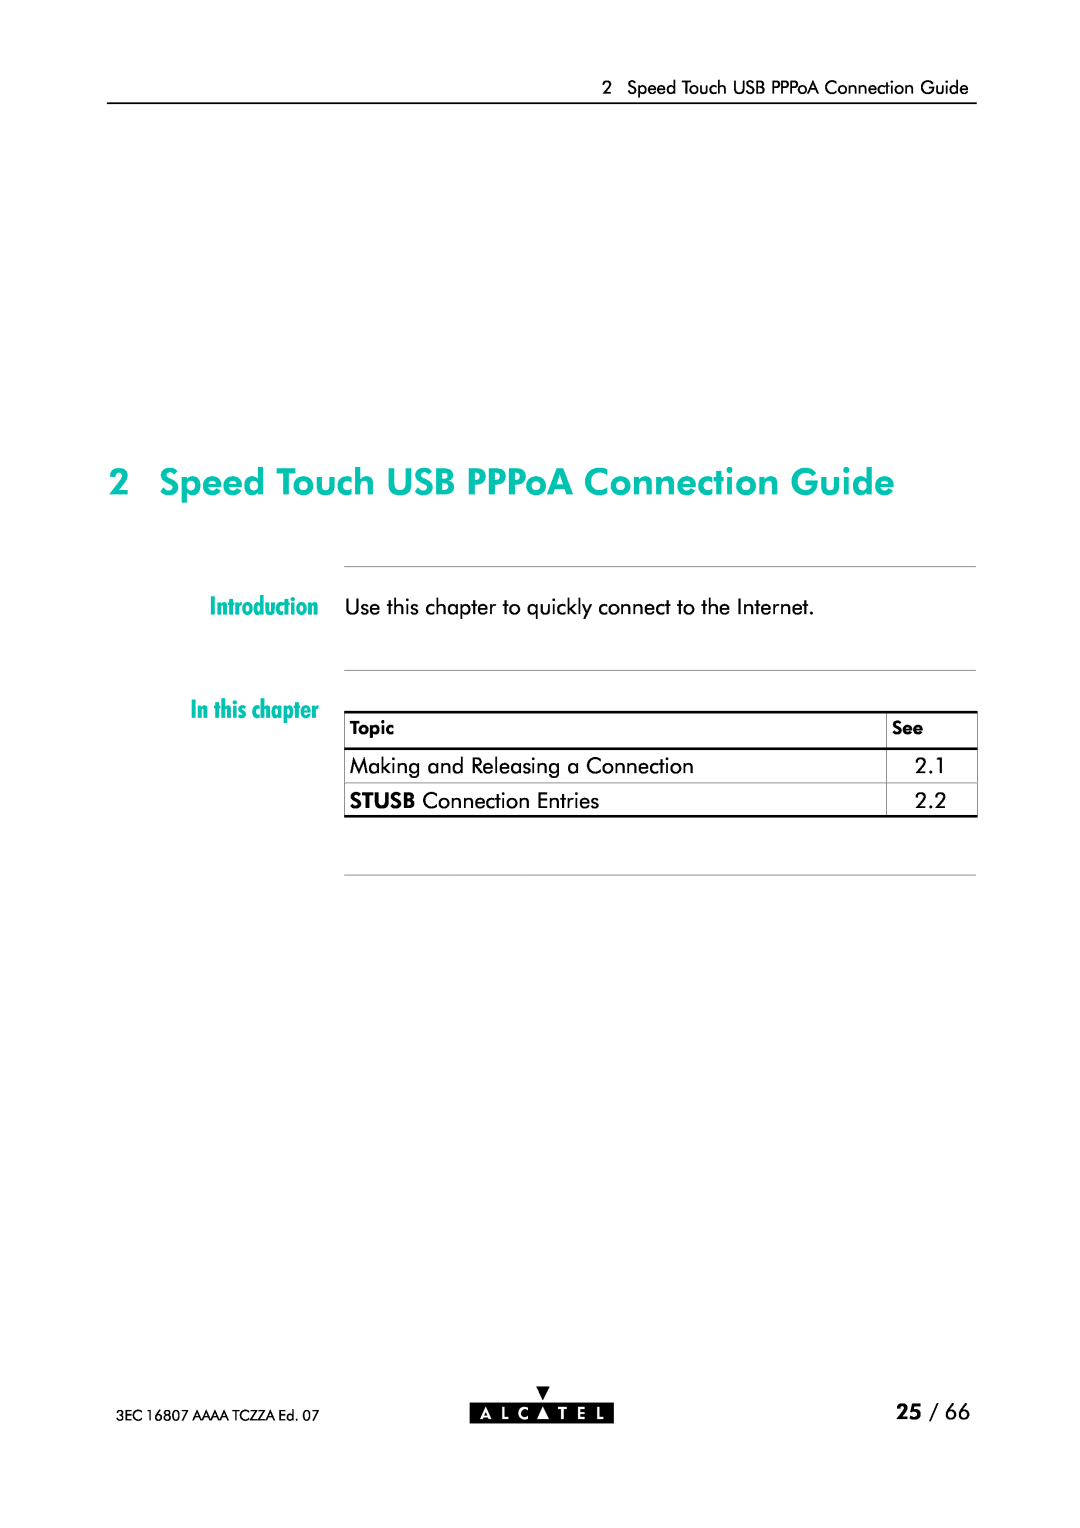 Alcatel Carrier Internetworking Solutions 3EC 16807 AAAA TCZZA ED. 07 Introduction, Speed Touch USB PPPoA Connection Guide 